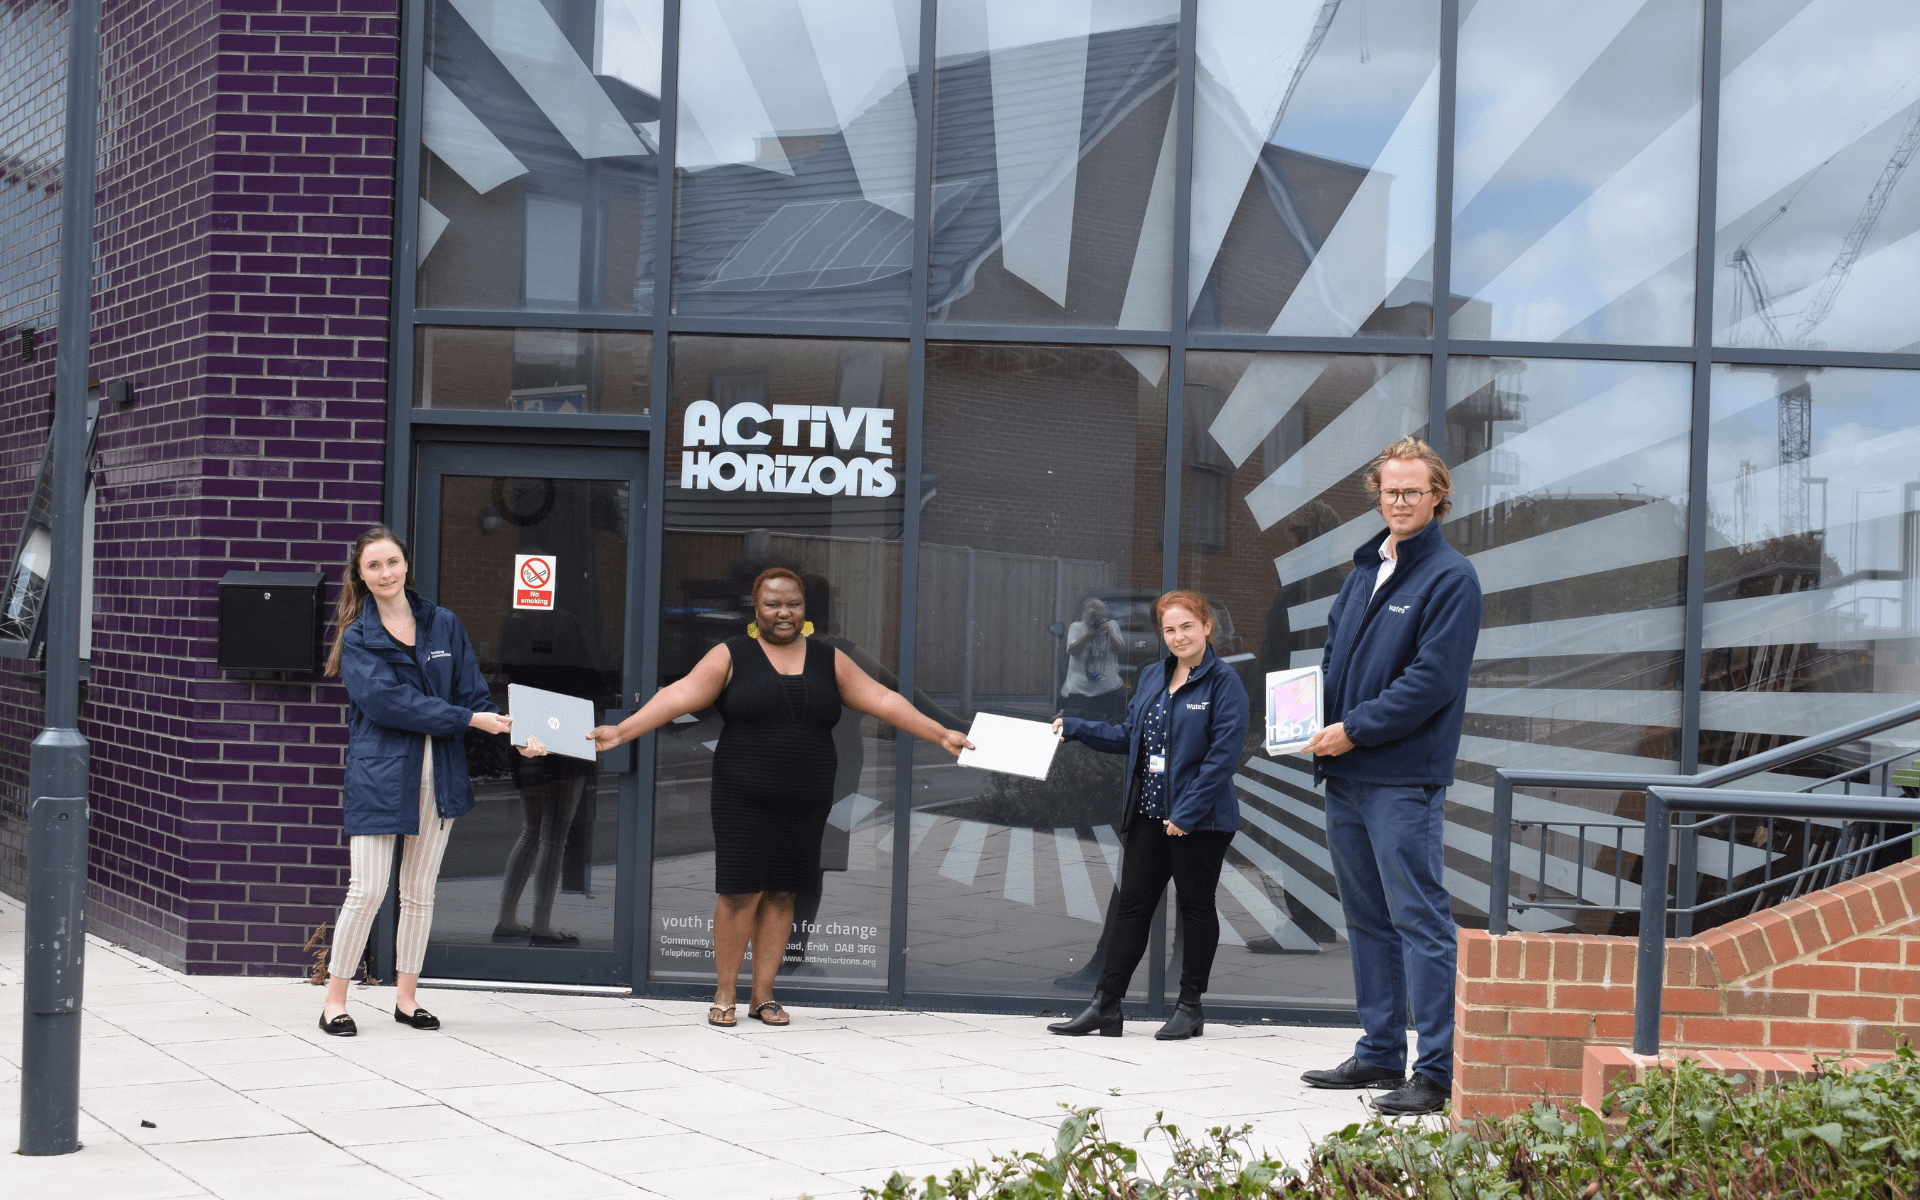 Orbit And Wates Donate IT Equipment To Erith Residents